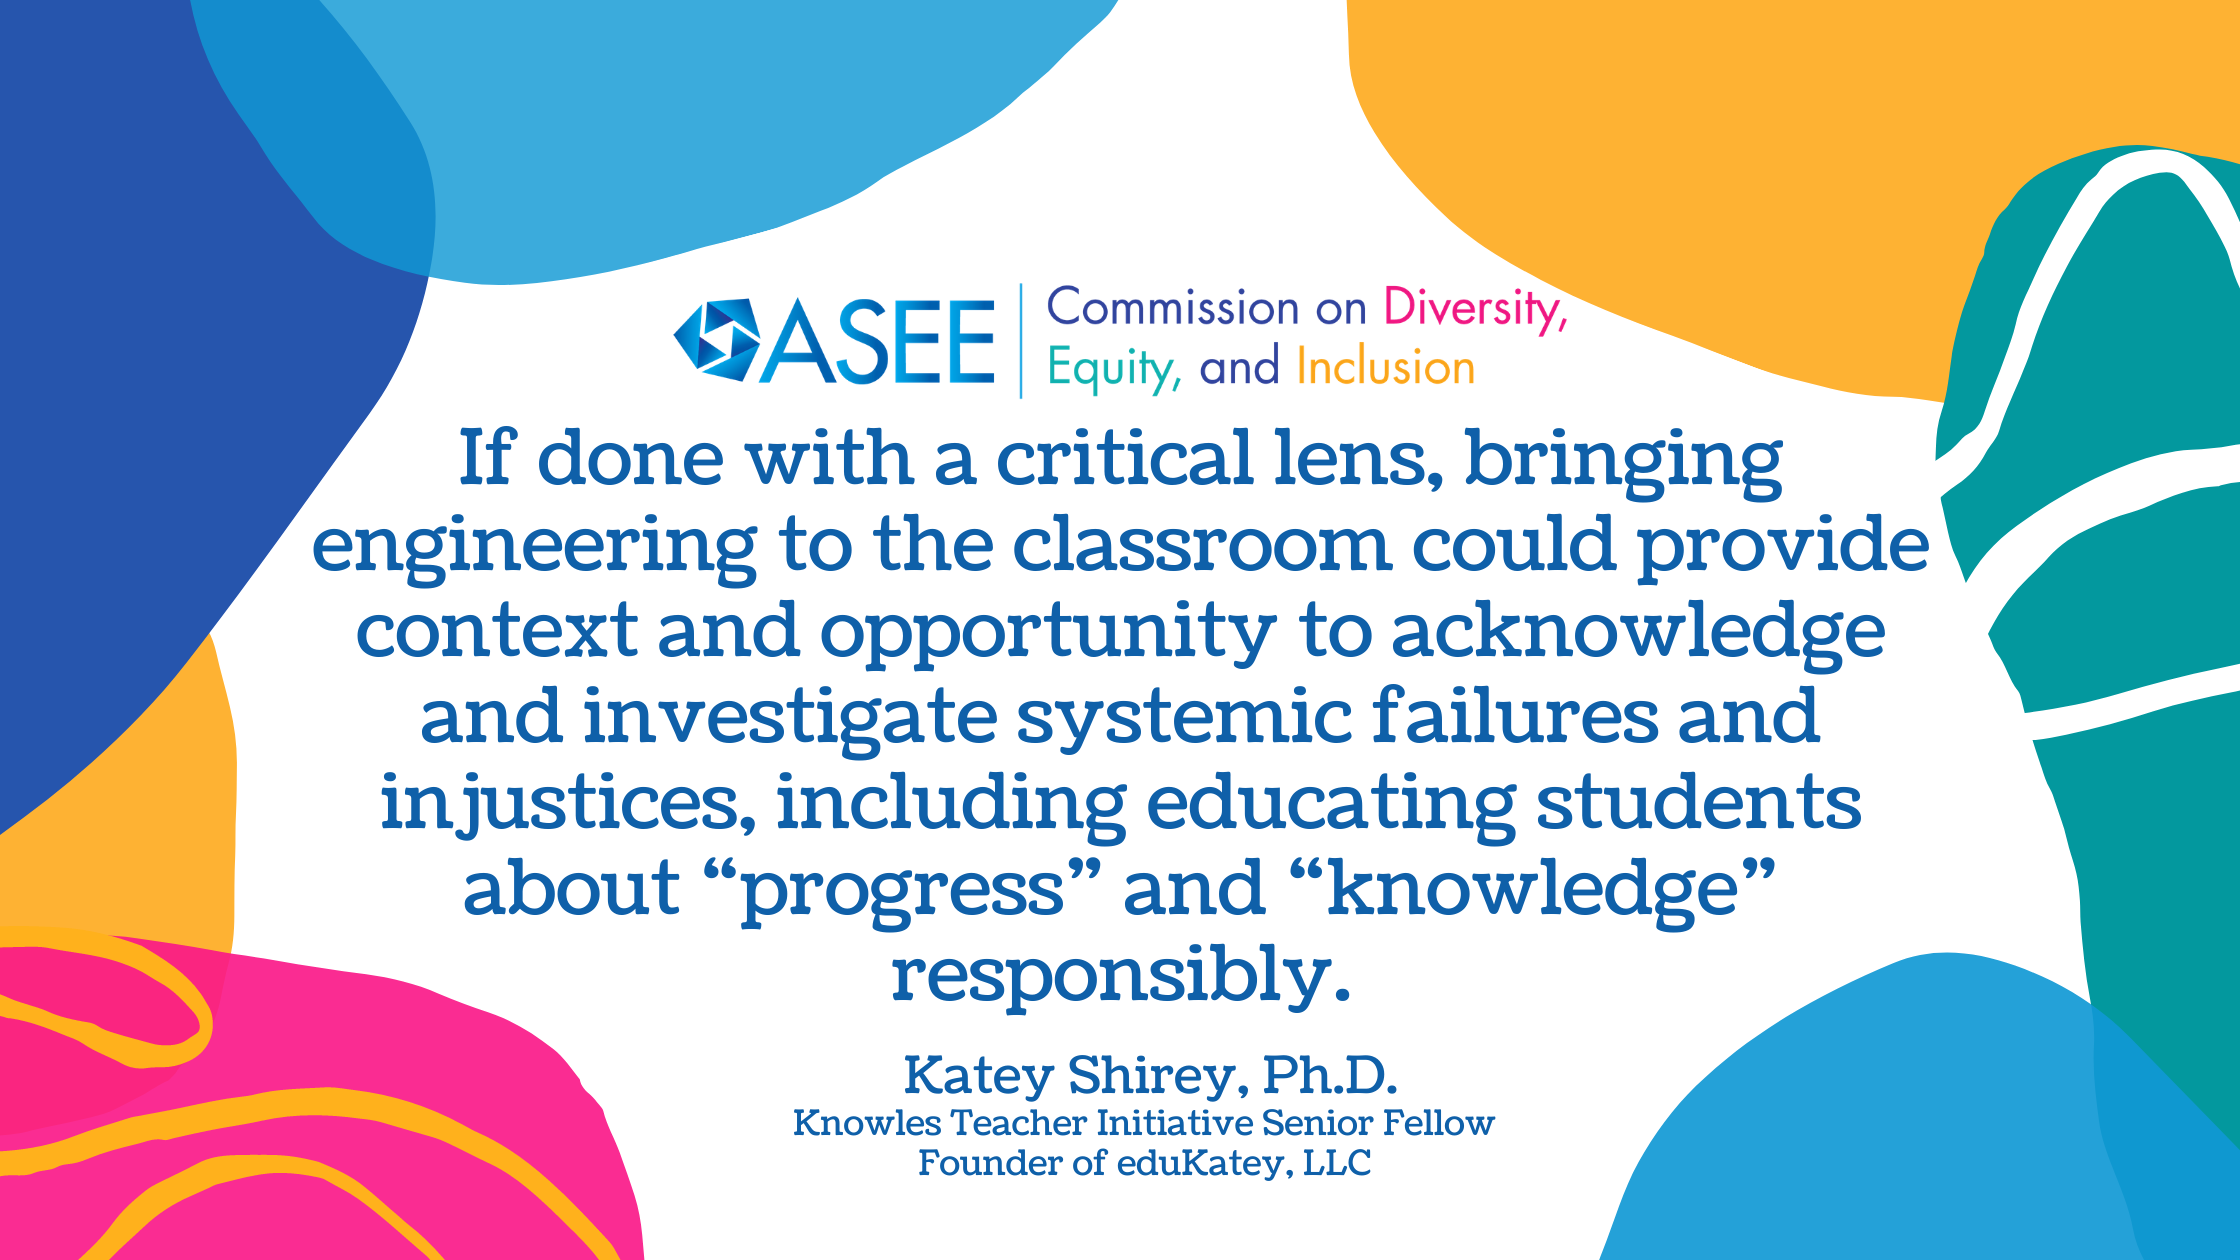 Katey Shirey Quote: If done with a critical lens, bringing engineering to the classroom could provide context and opportunity to acknowledge and investigate systemic failures and injustices, including educating students about “progress” and “knowledge” responsibly.